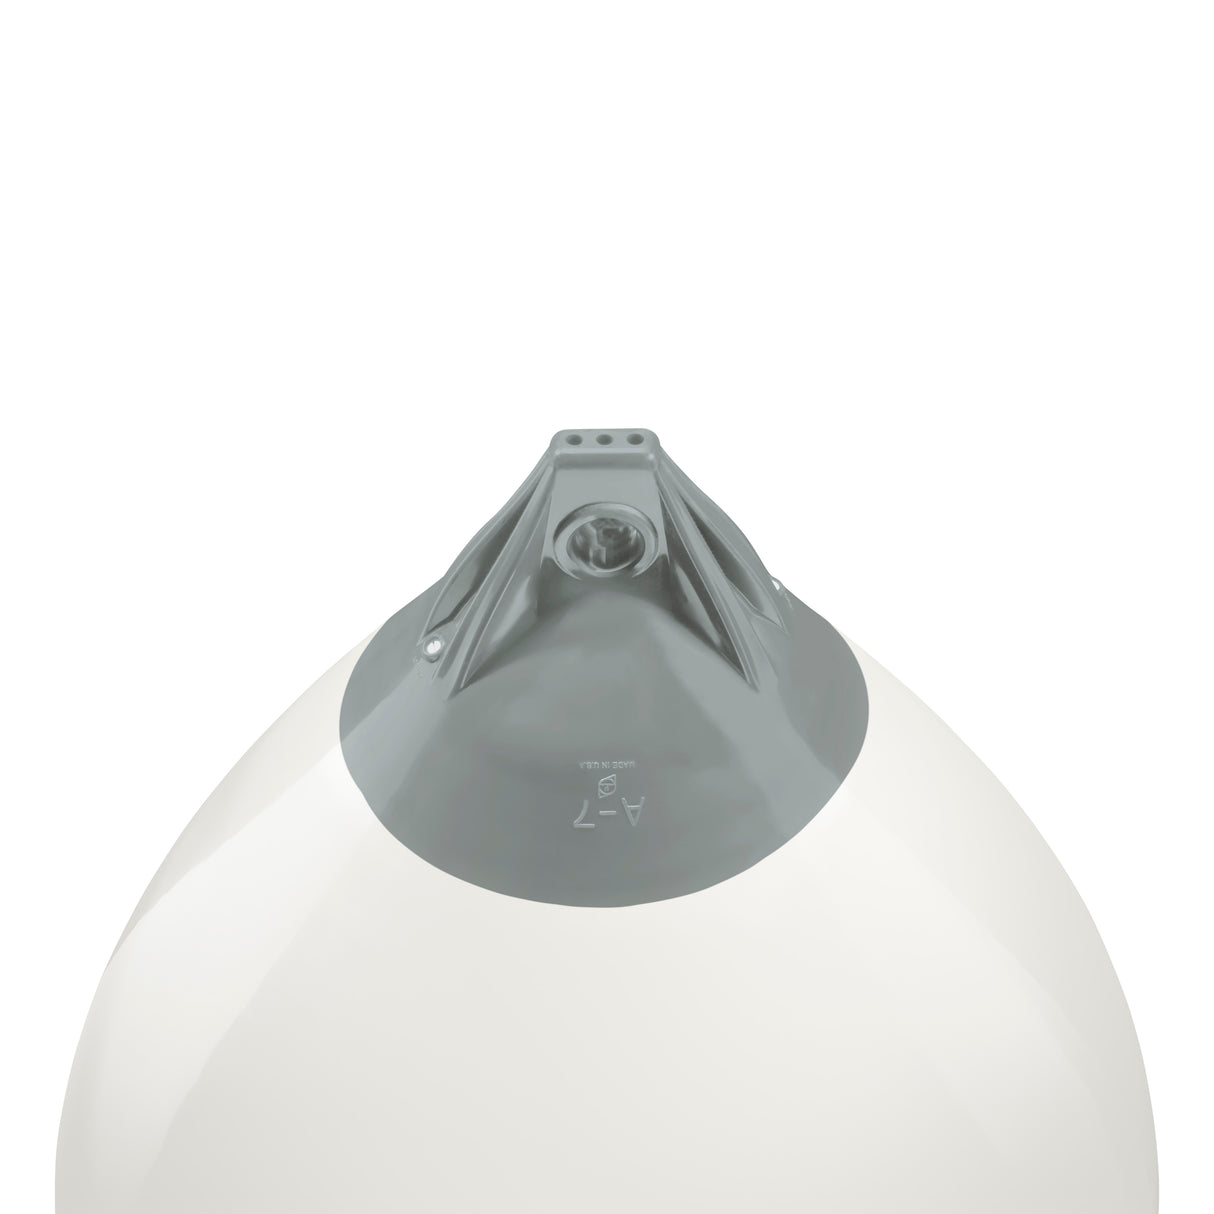 White buoy with Grey-Top, Polyform A-7 angled shot